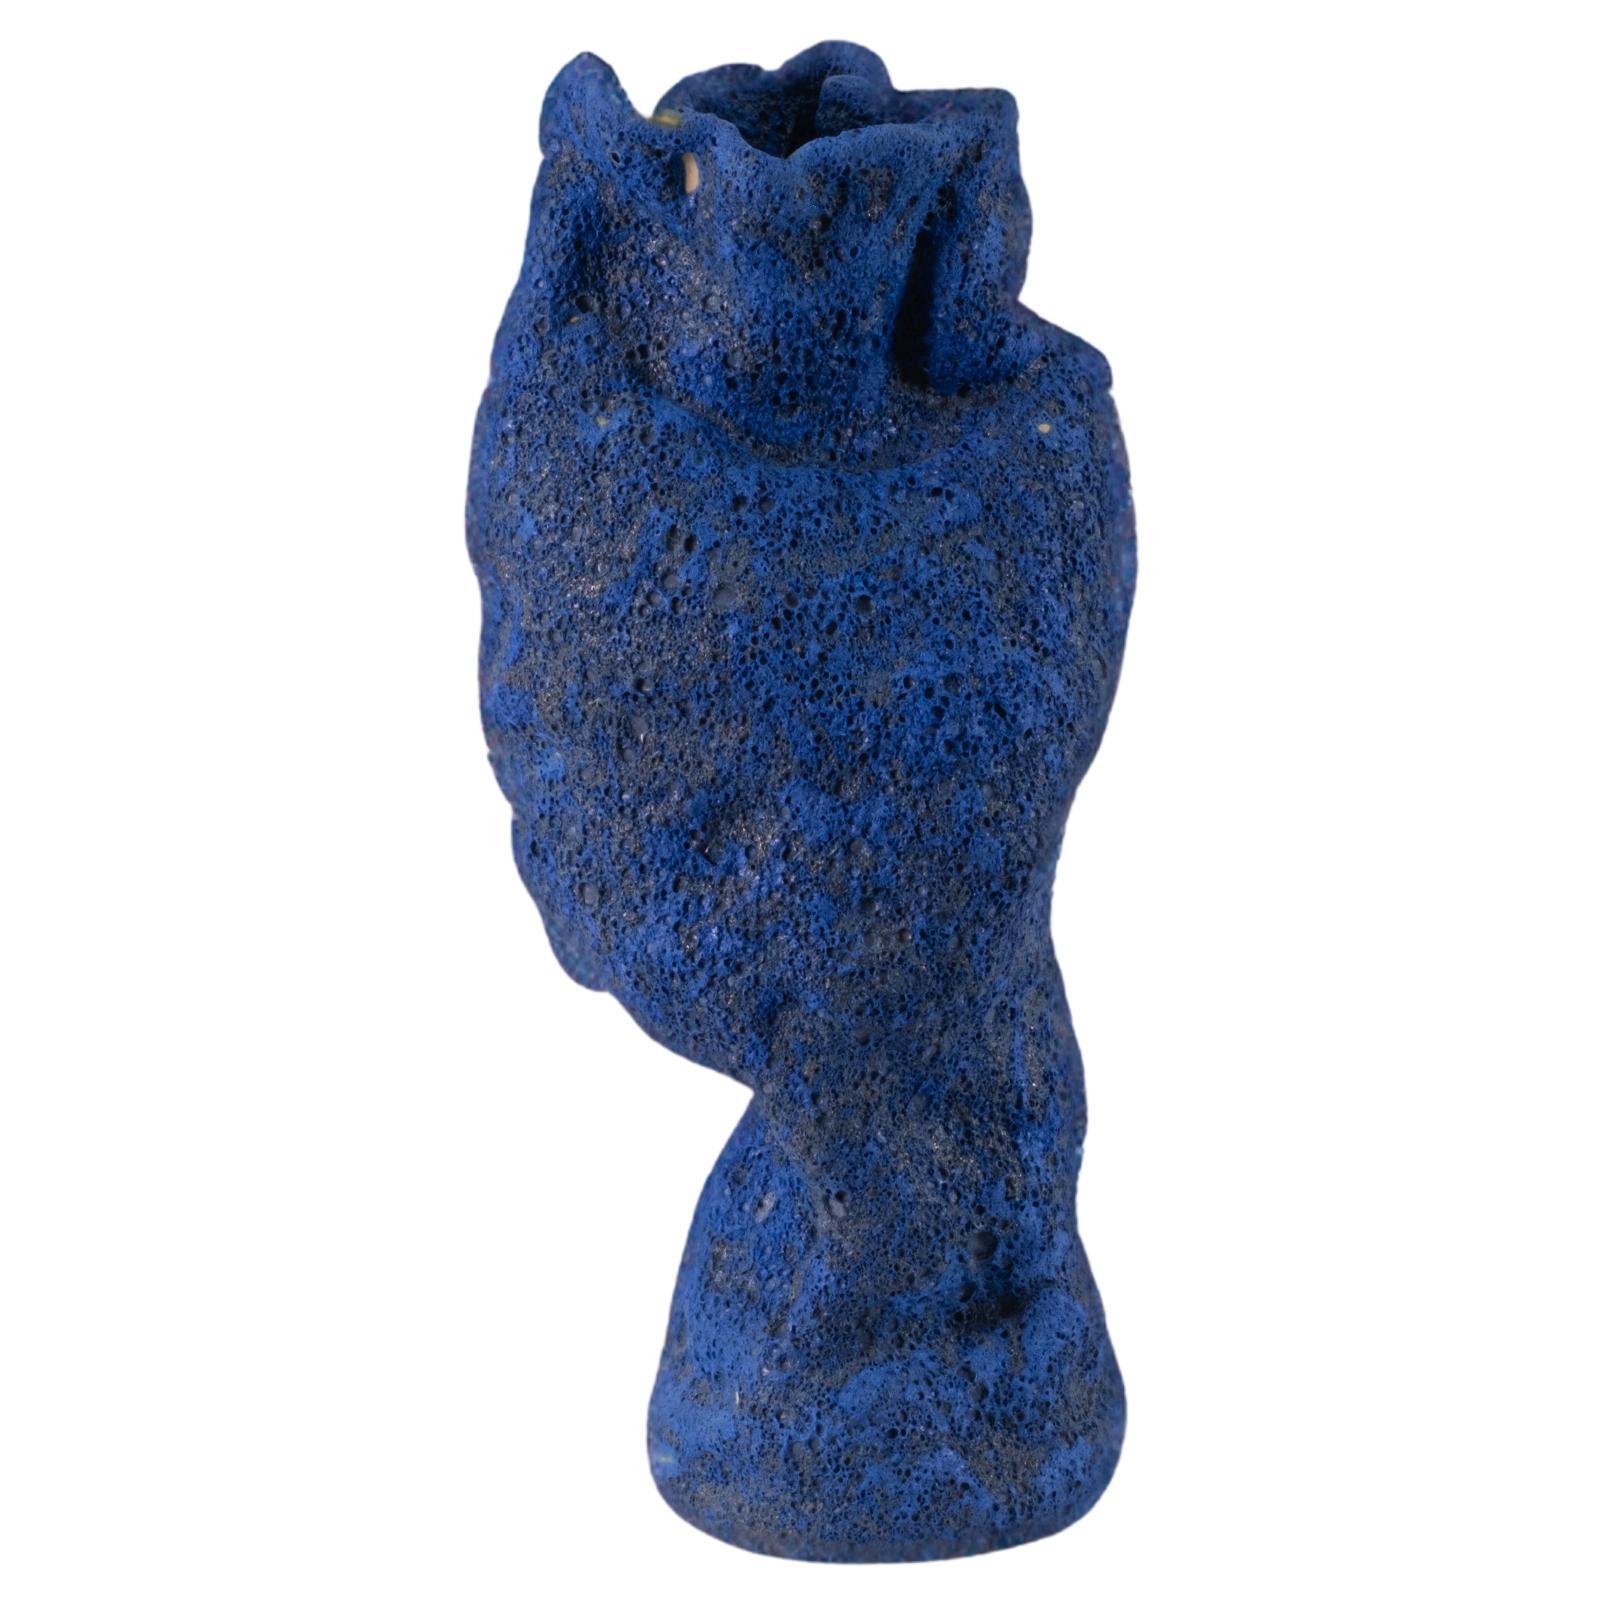 Blue Cratered Vessel by Alex Muradian